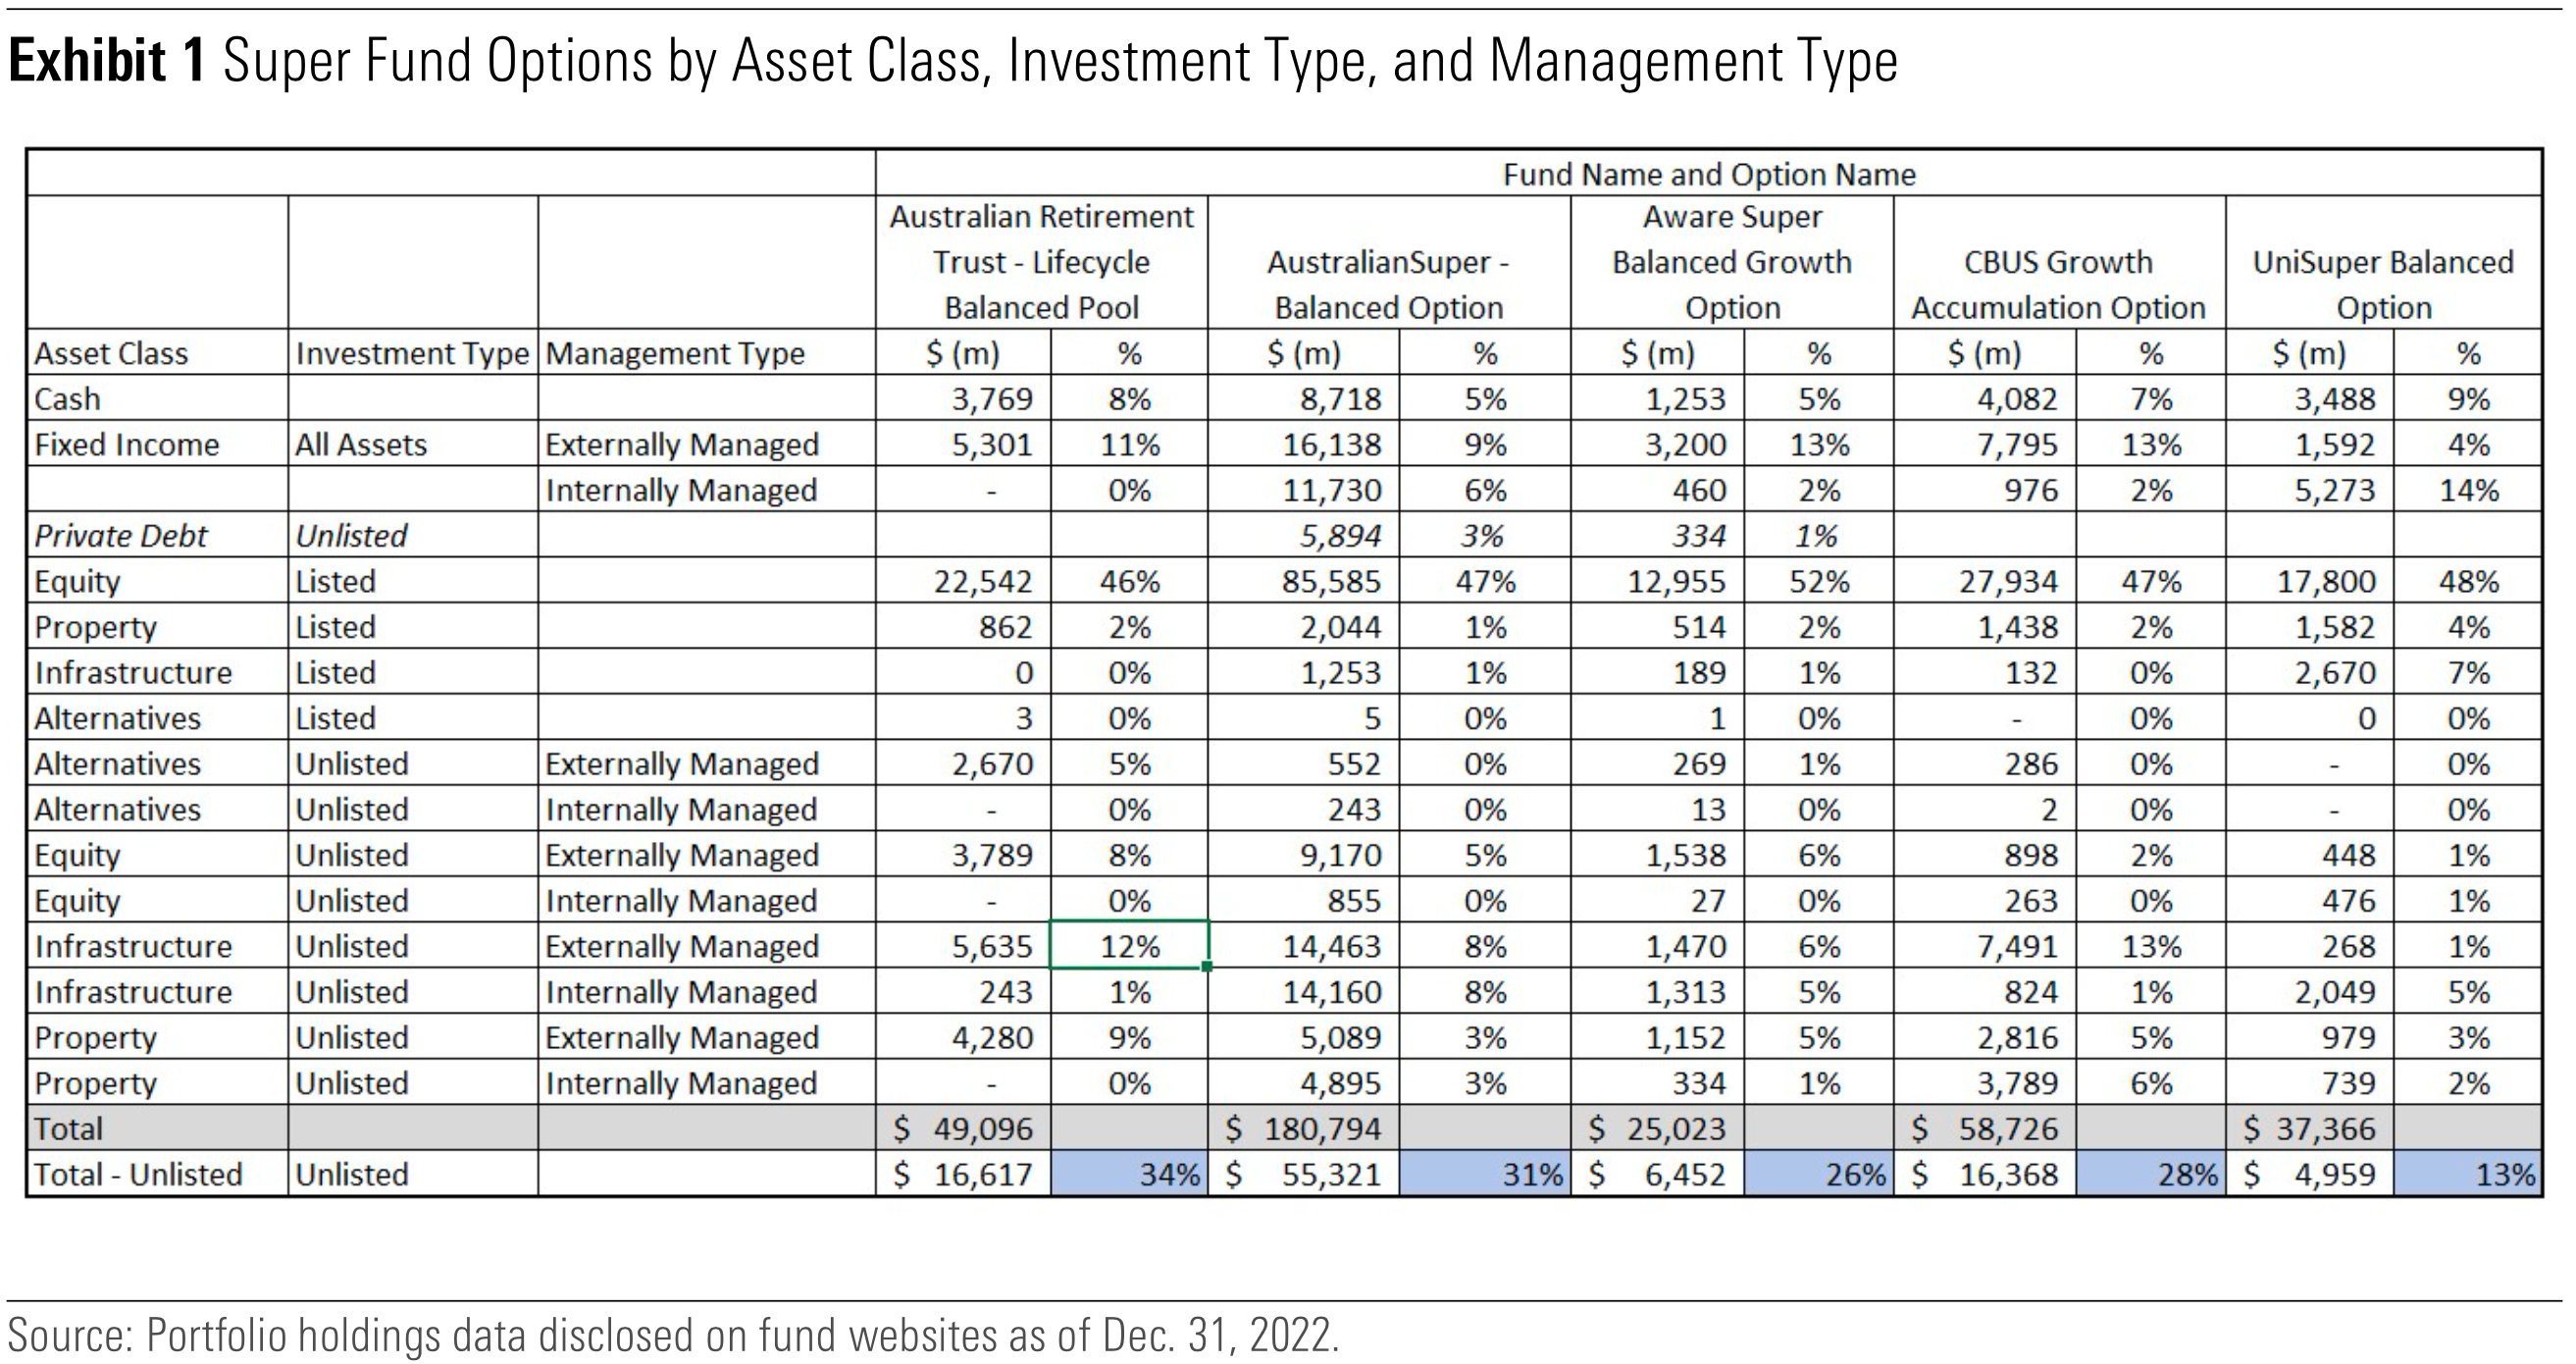 Super fund options by asset class